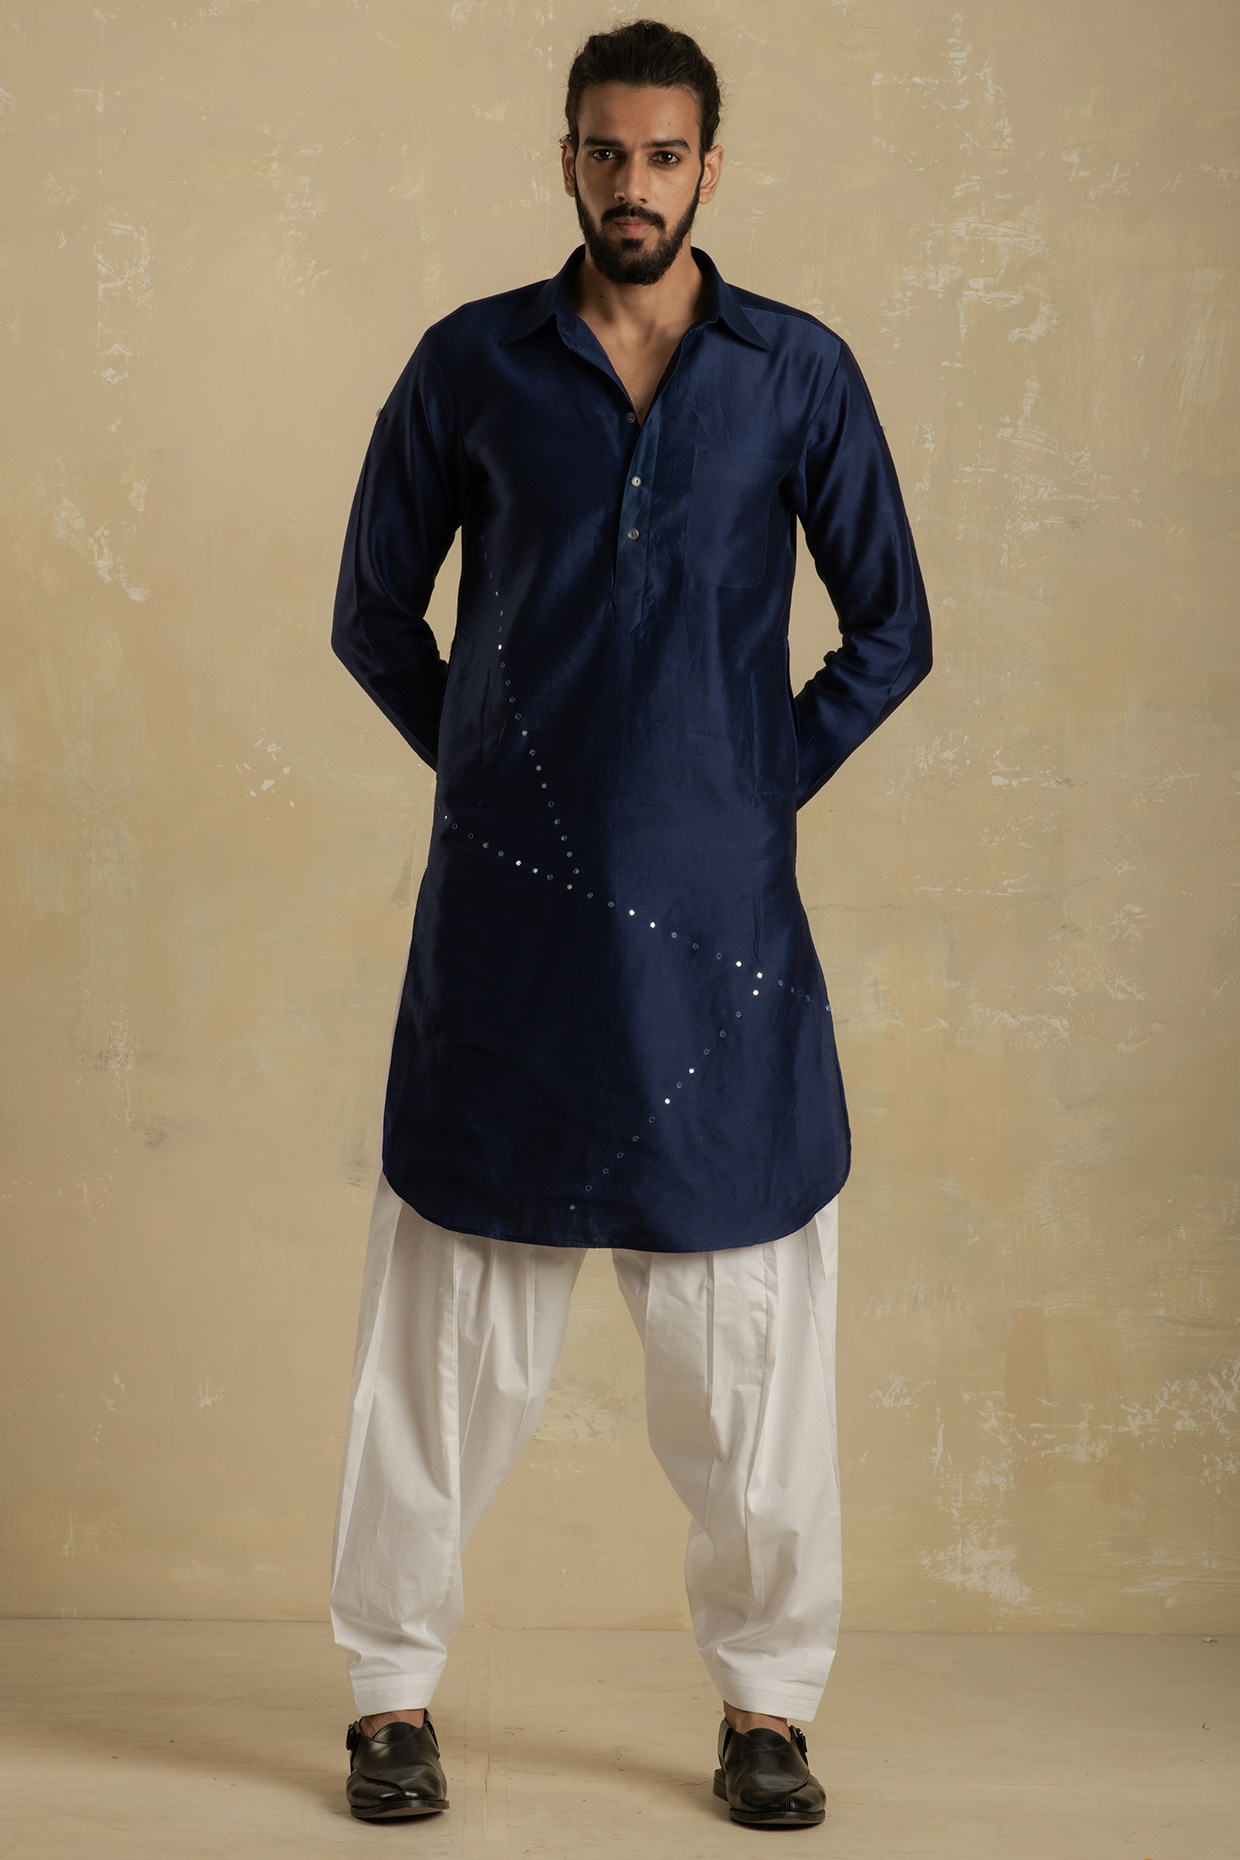 Buy Cotton Kurta Navy Blue White Everyday Cotton Trouser for Best Price  Reviews Free Shipping